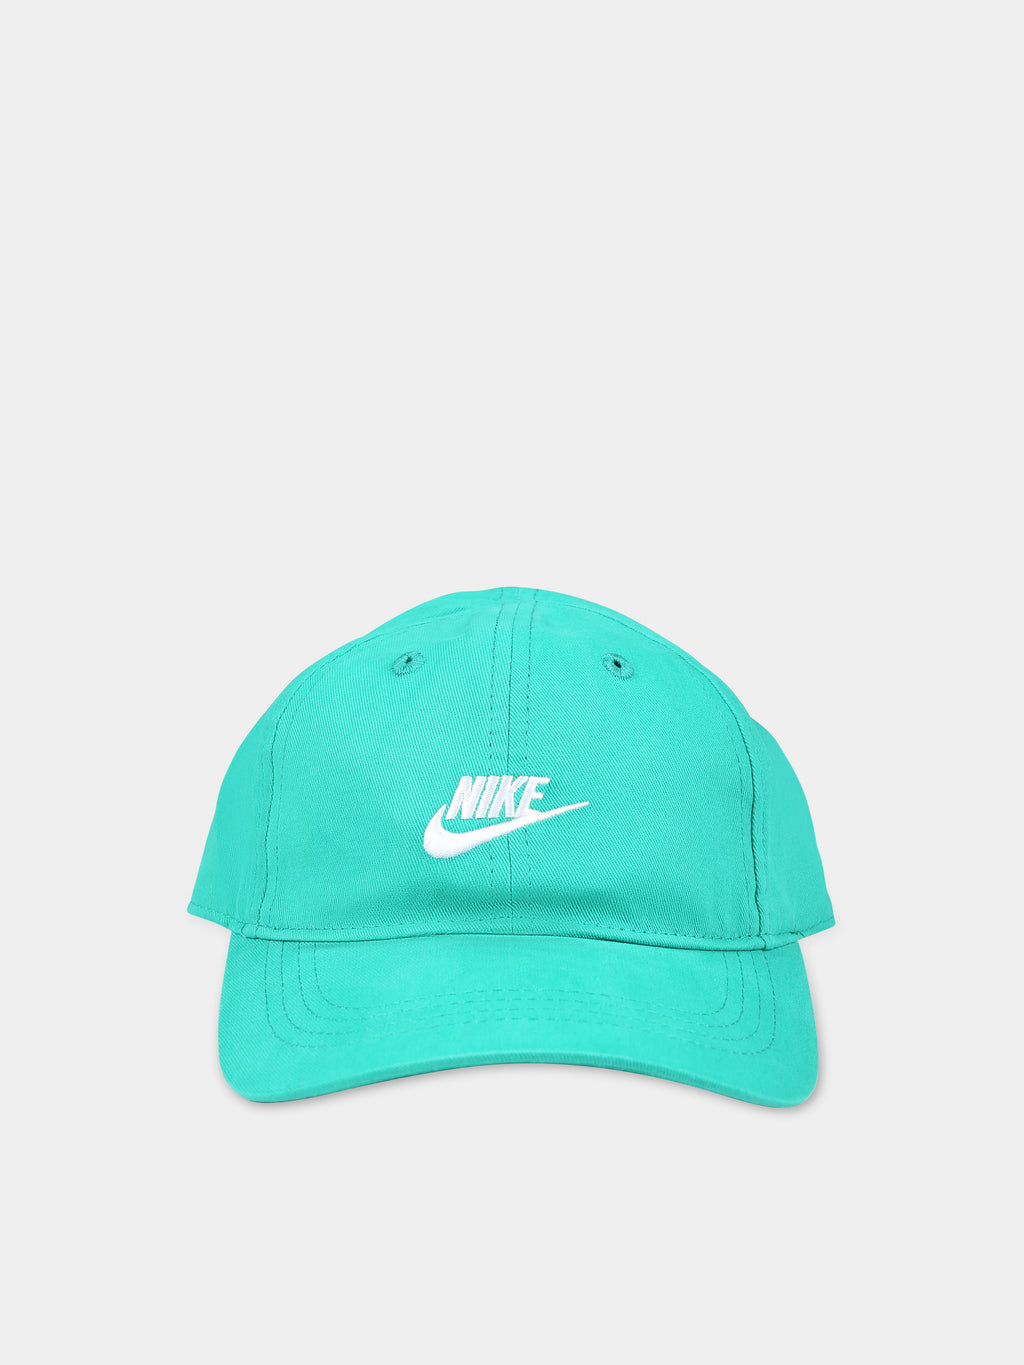 Green hat with visor for kids with the iconic swoosh